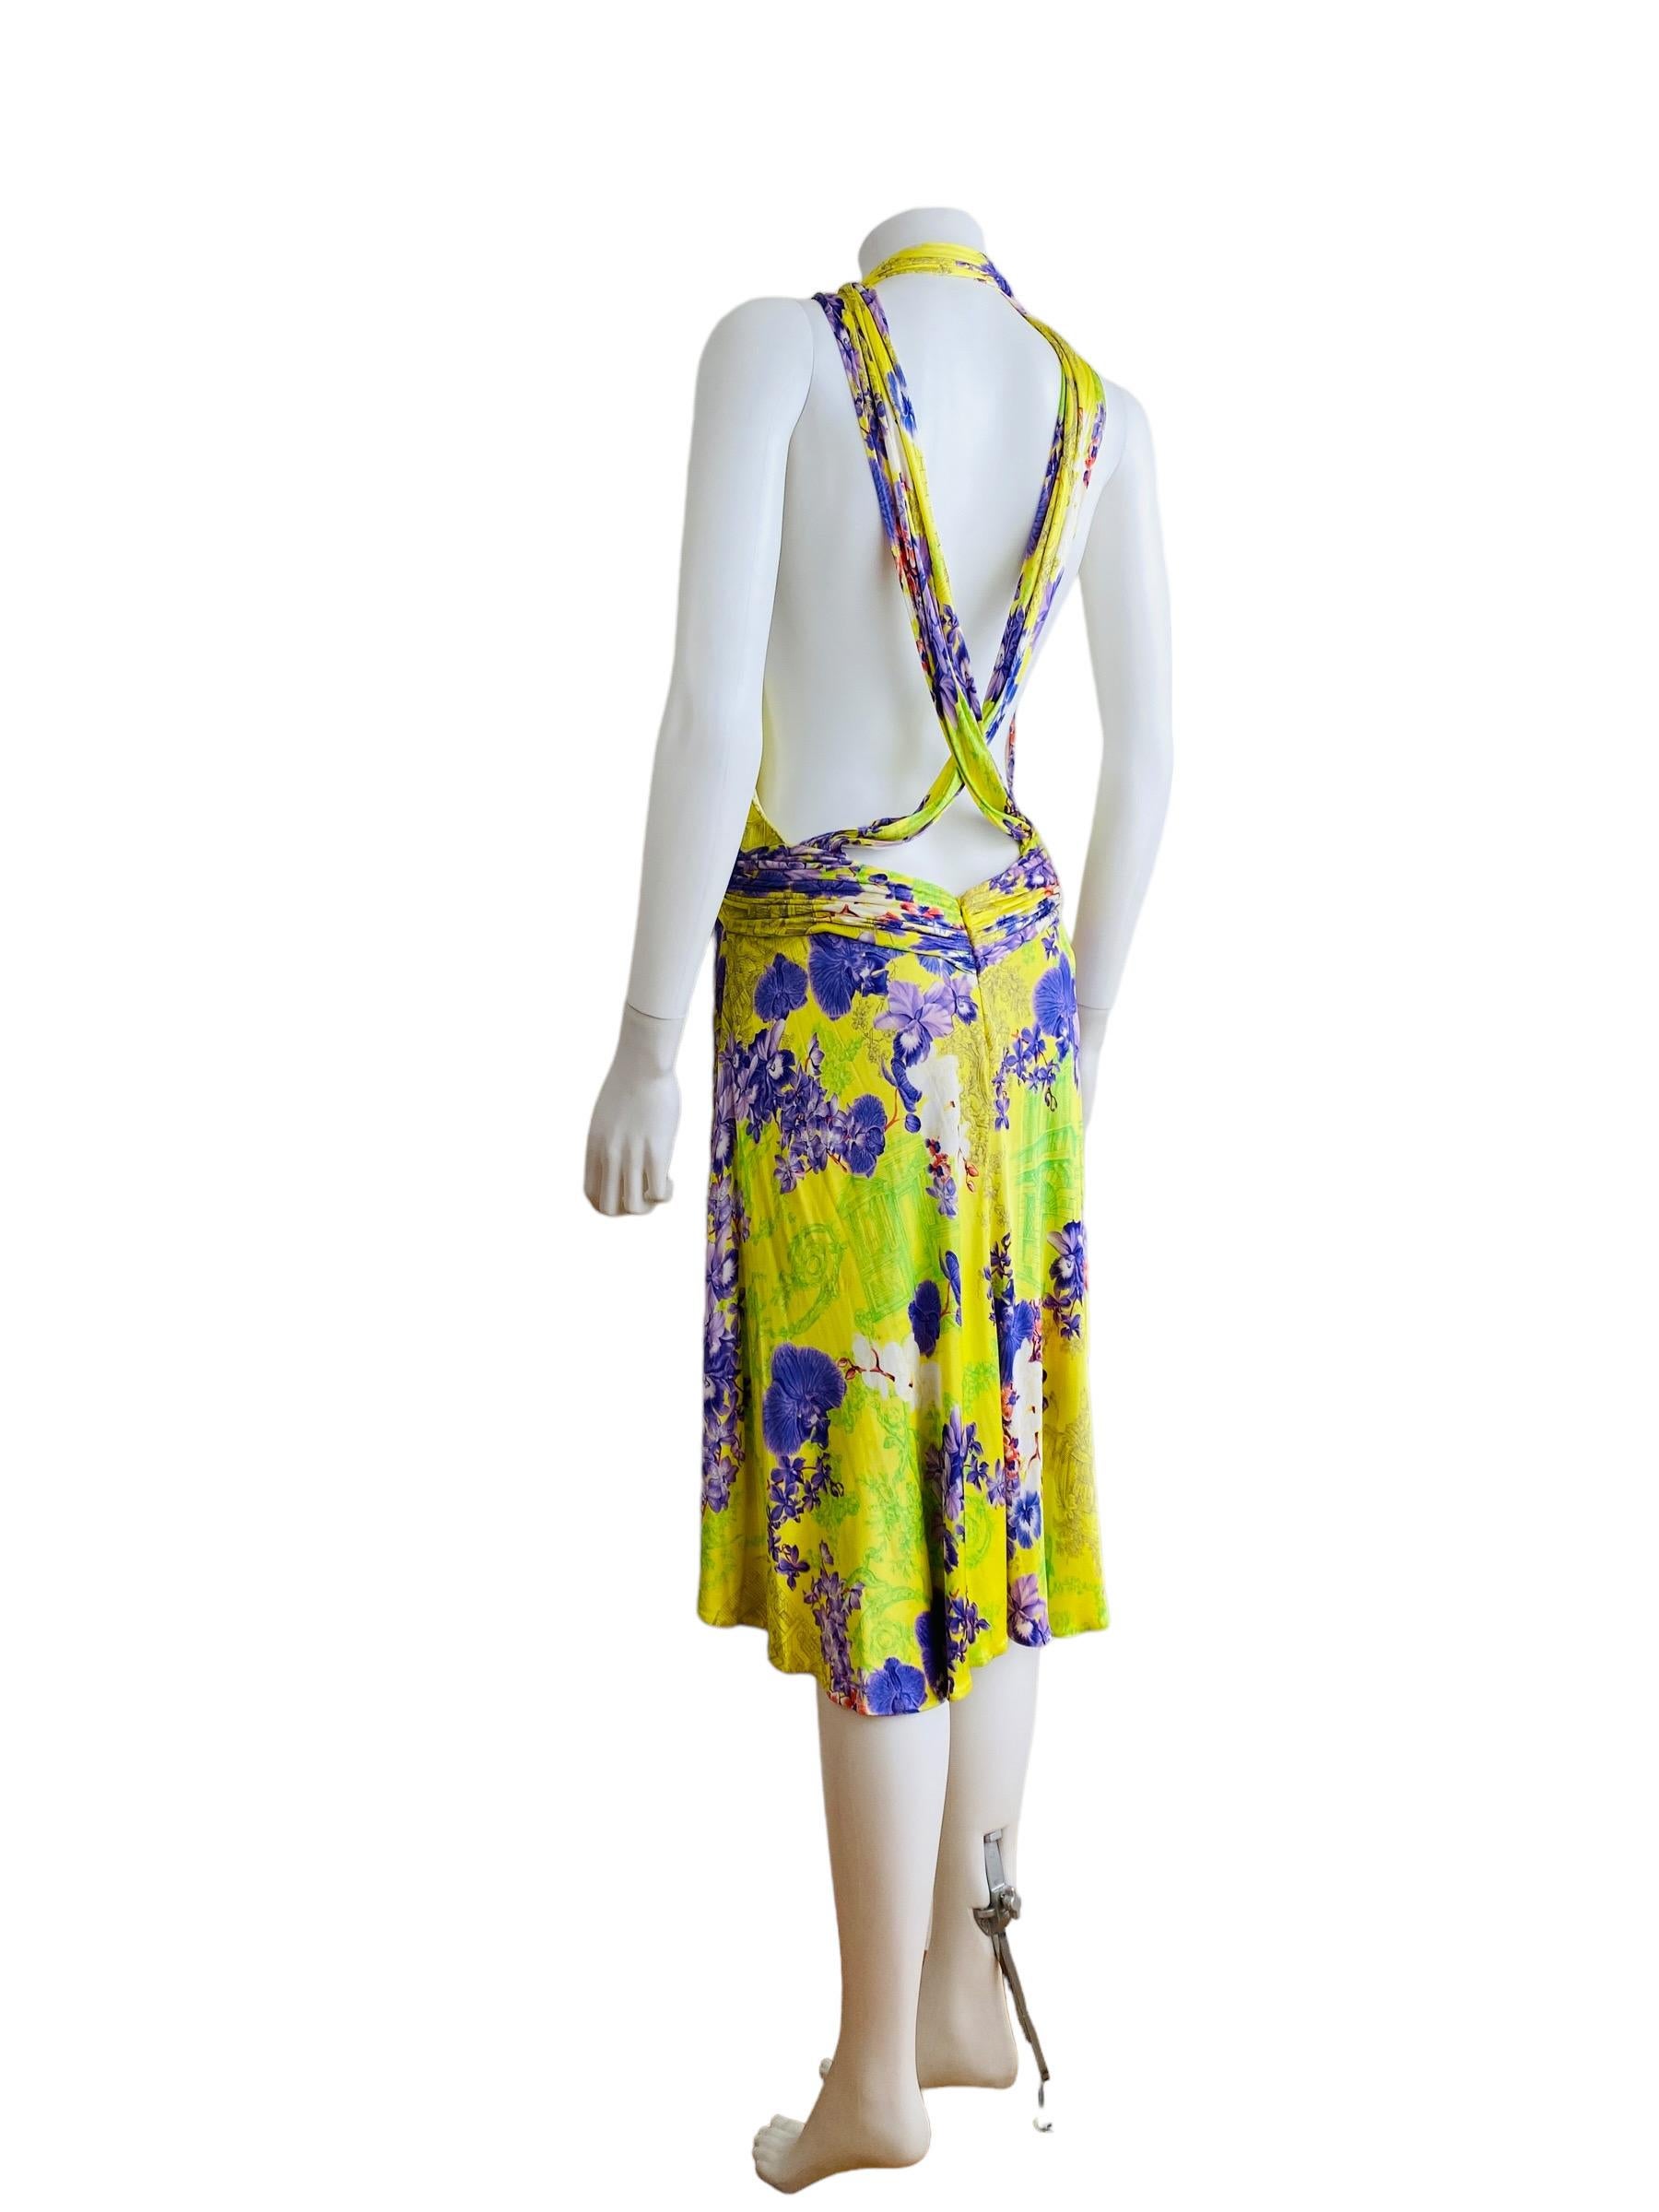 Vintage S/S 2004 Versace Dress Bright Yellow + Purple Orchid Floral Runway For Sale 9